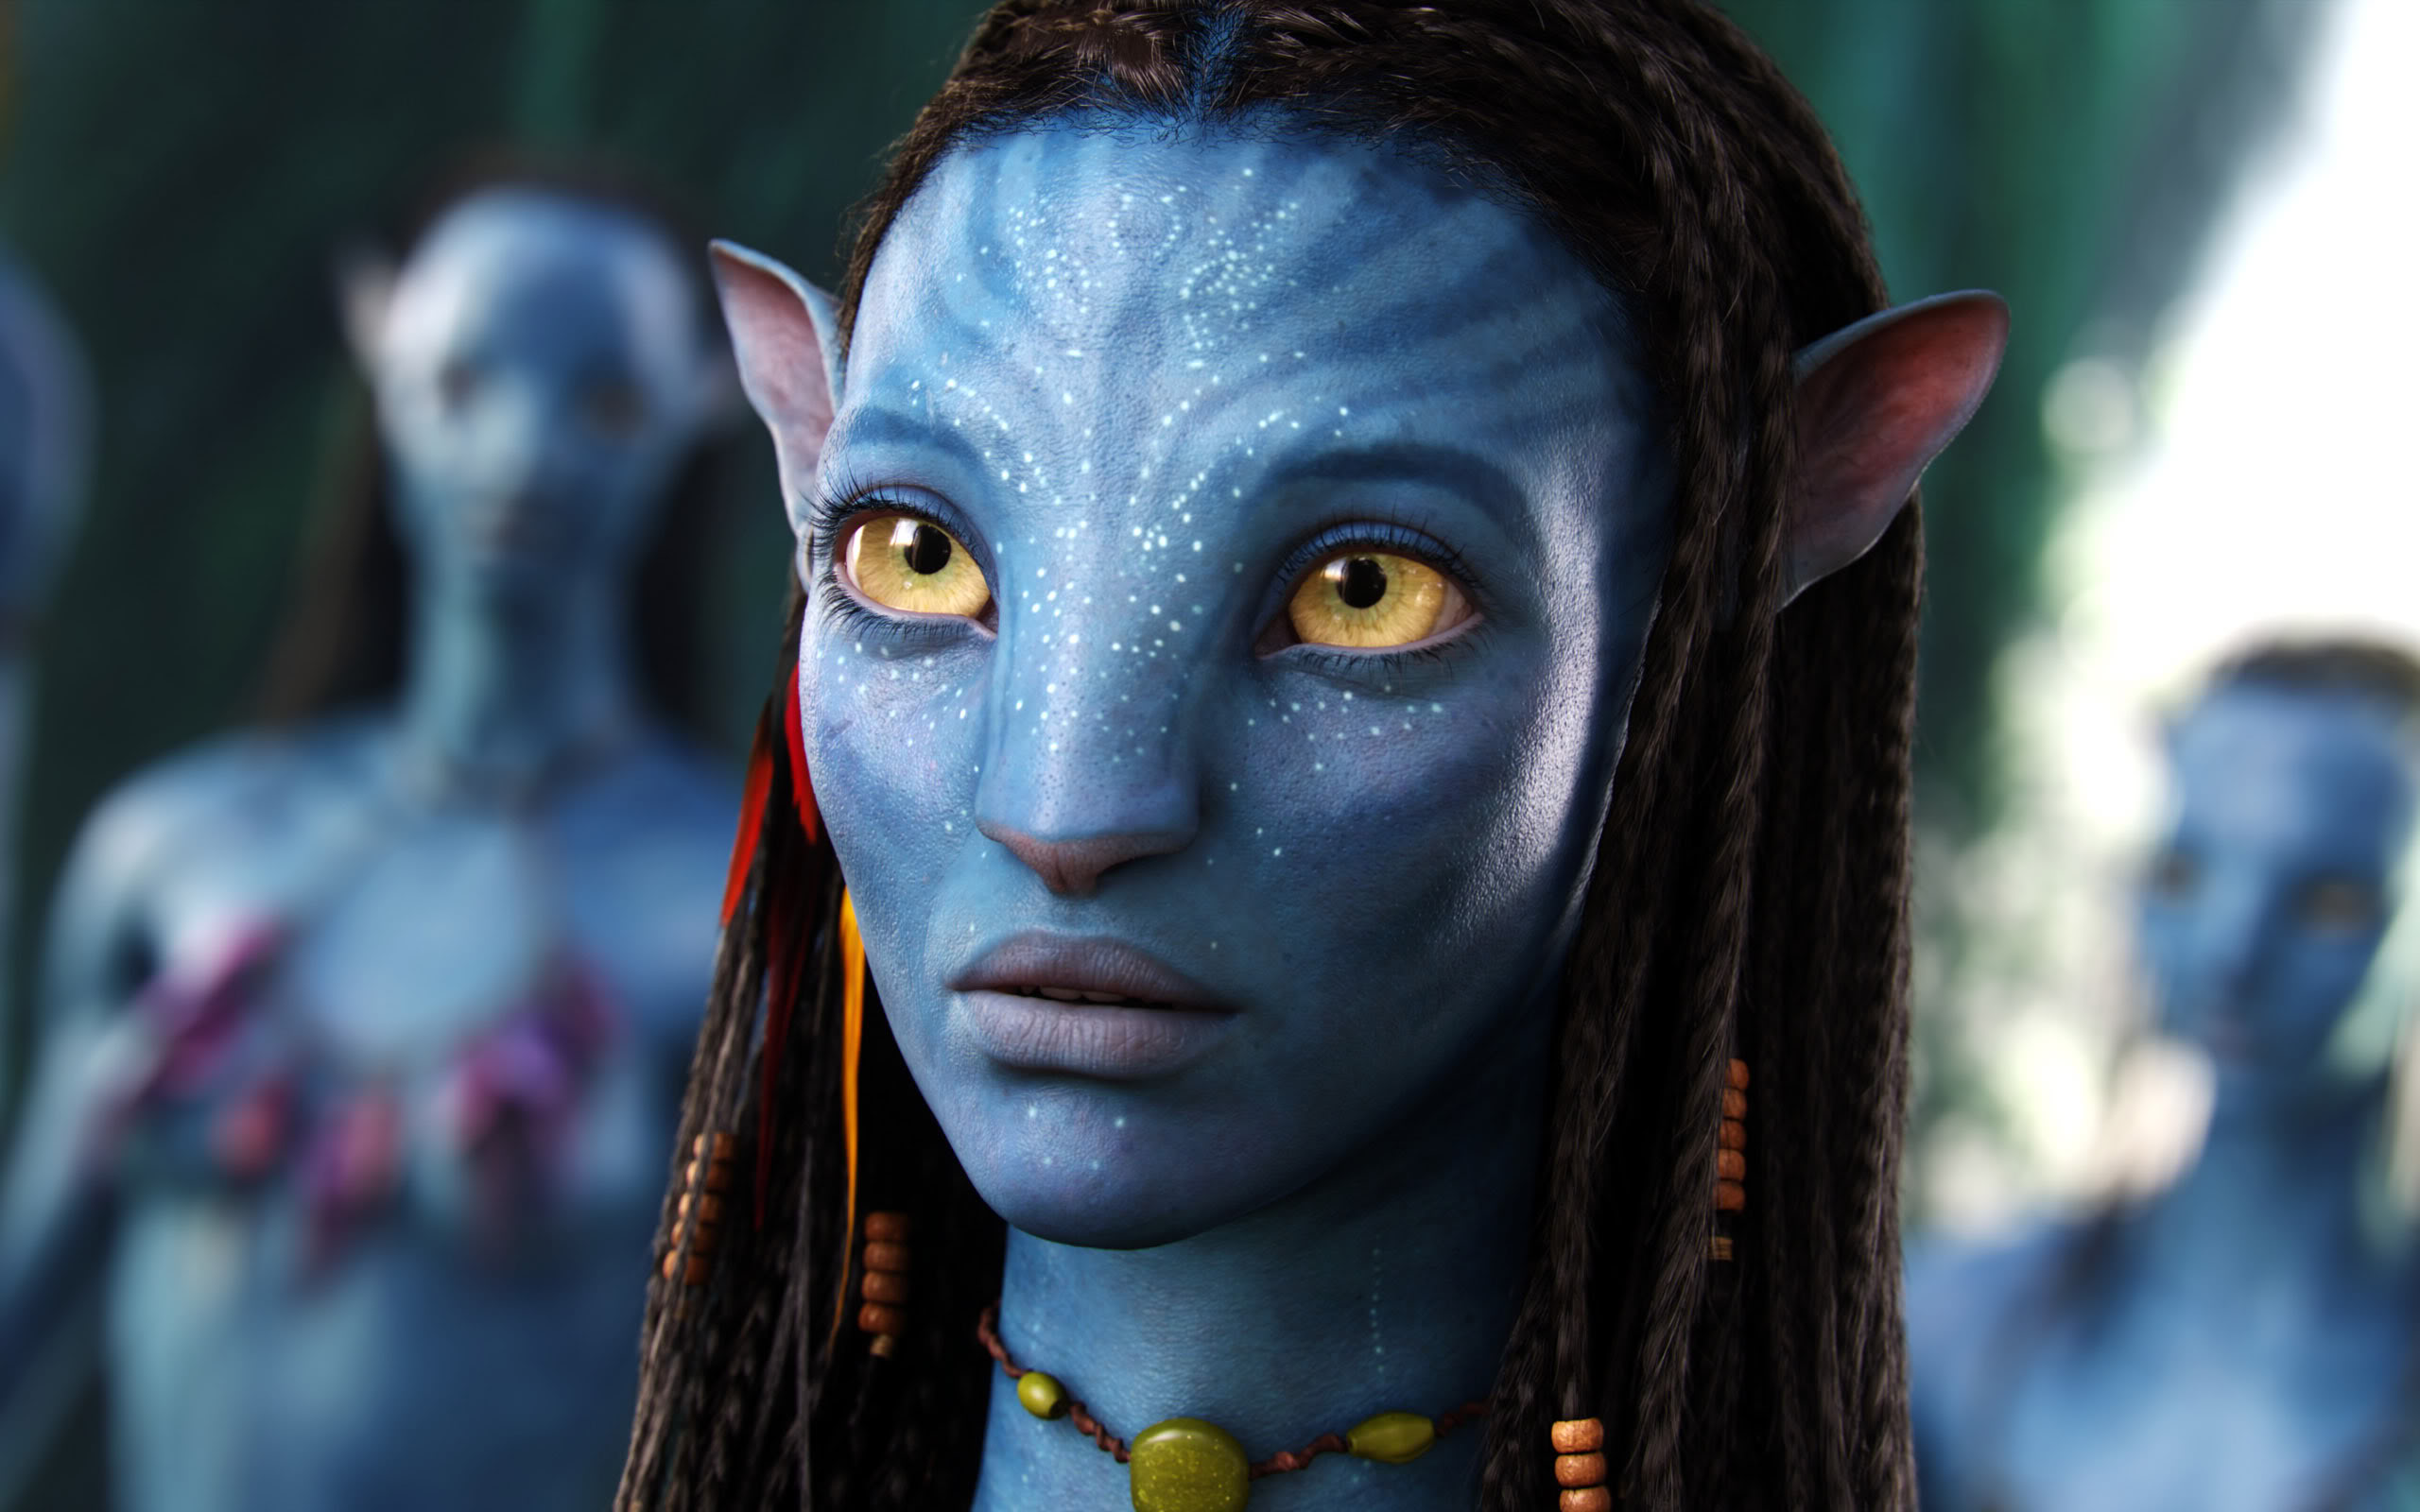 Neytiri 4K wallpaper for your desktop or mobile screen free and easy to download